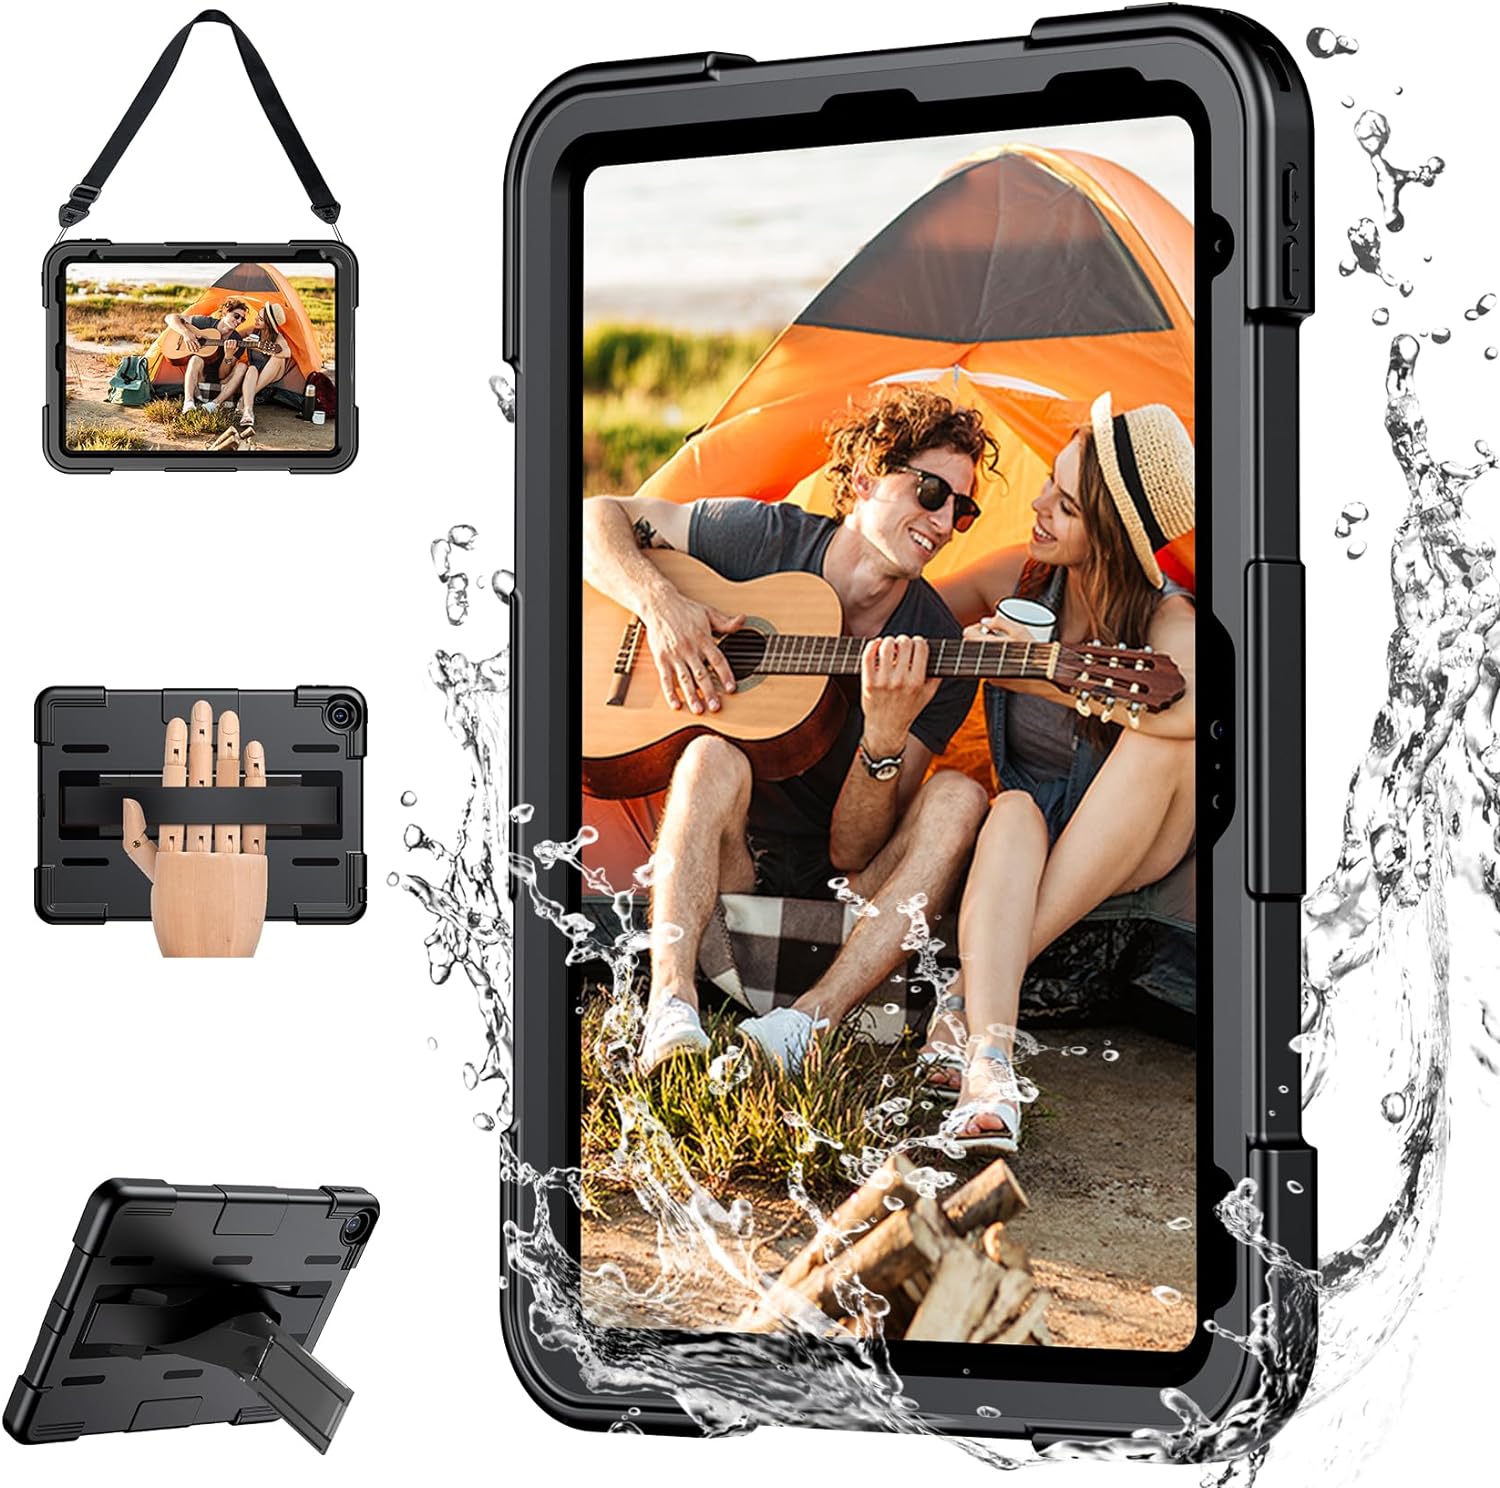   for iPad Mini 6 Case,[Military Grade Dropproof][IP68 Waterproof] for iPad Mini 6th Generation 8.3 Inch with Screen Protector&Stand&Hand Strap,Full Body Shockproof Case 2021